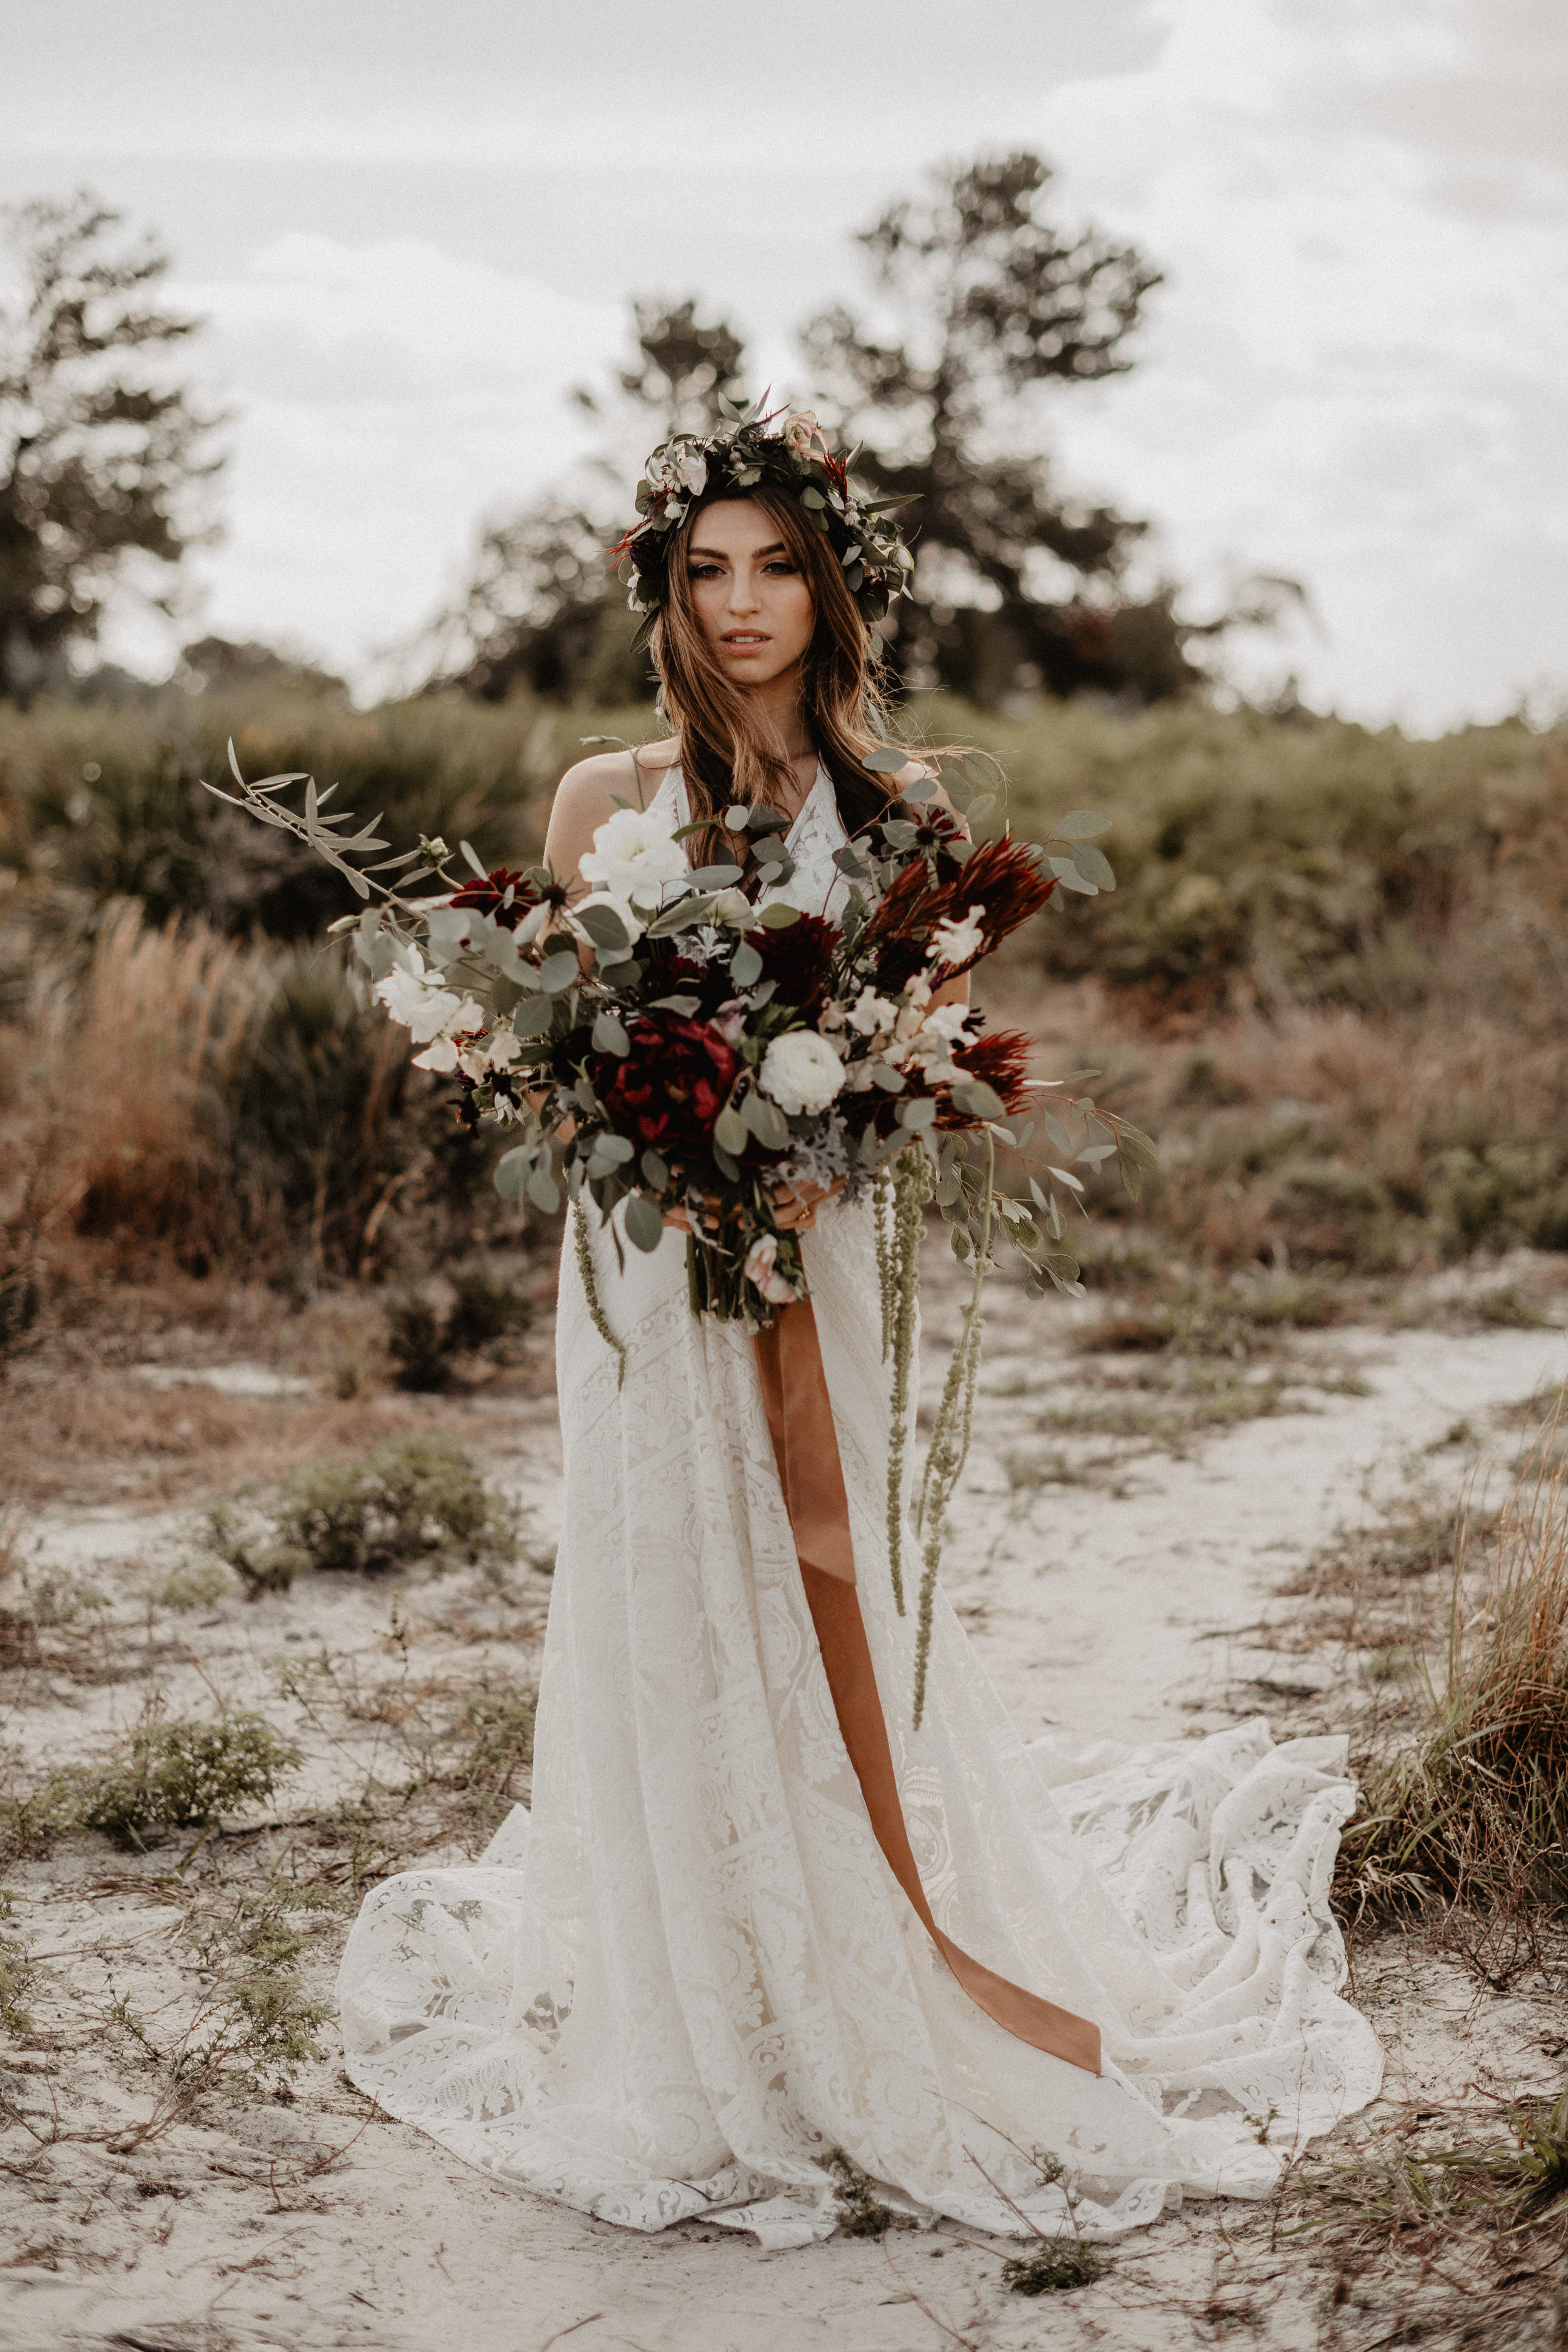 Wedding Dresses Bohemian Style Top 10 - Find the Perfect Venue for Your ...